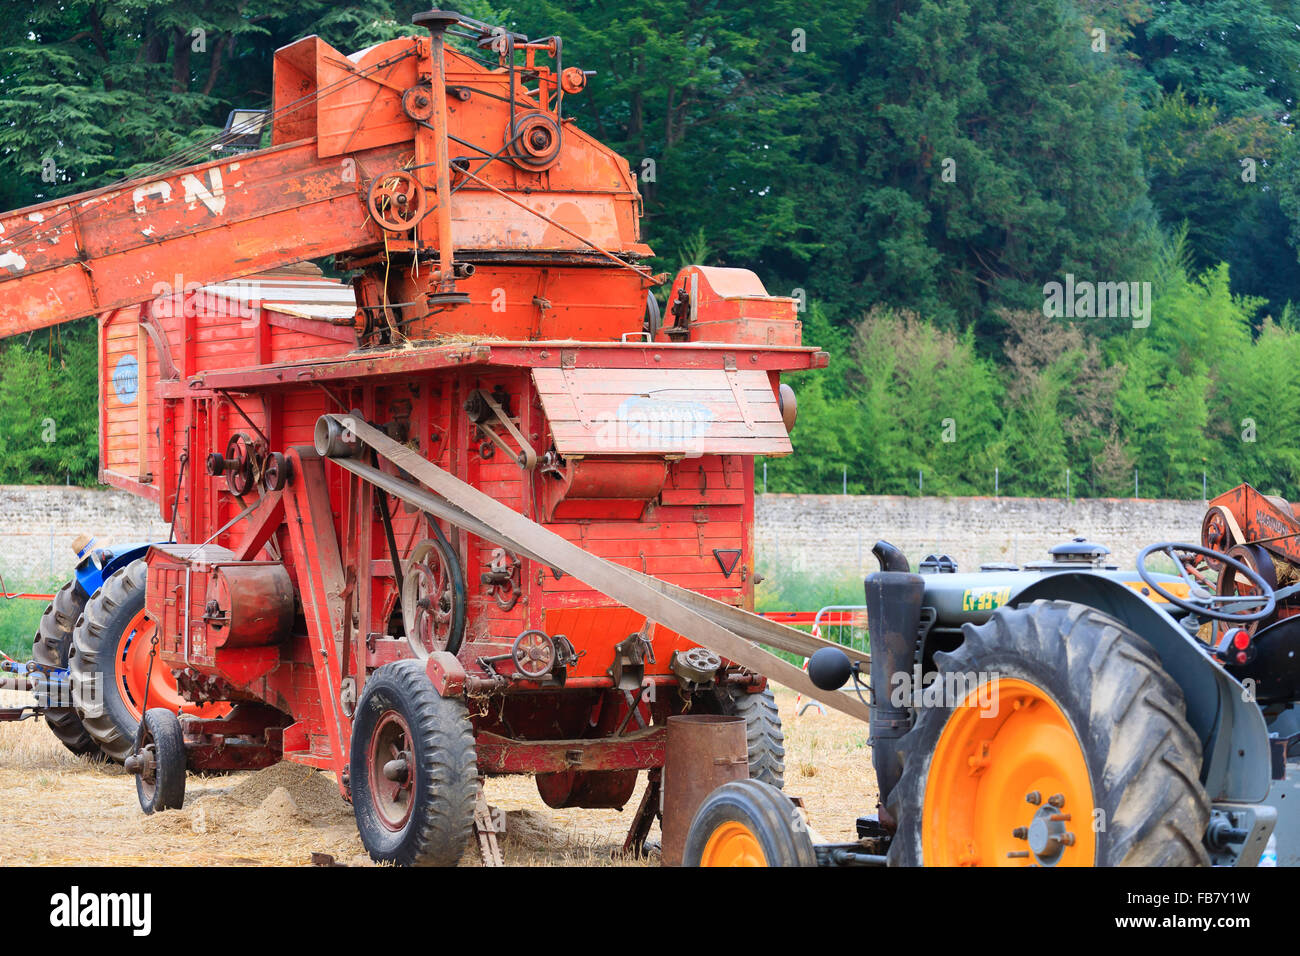 Old straw baler, agricultural vehicle, rural life Stock Photo